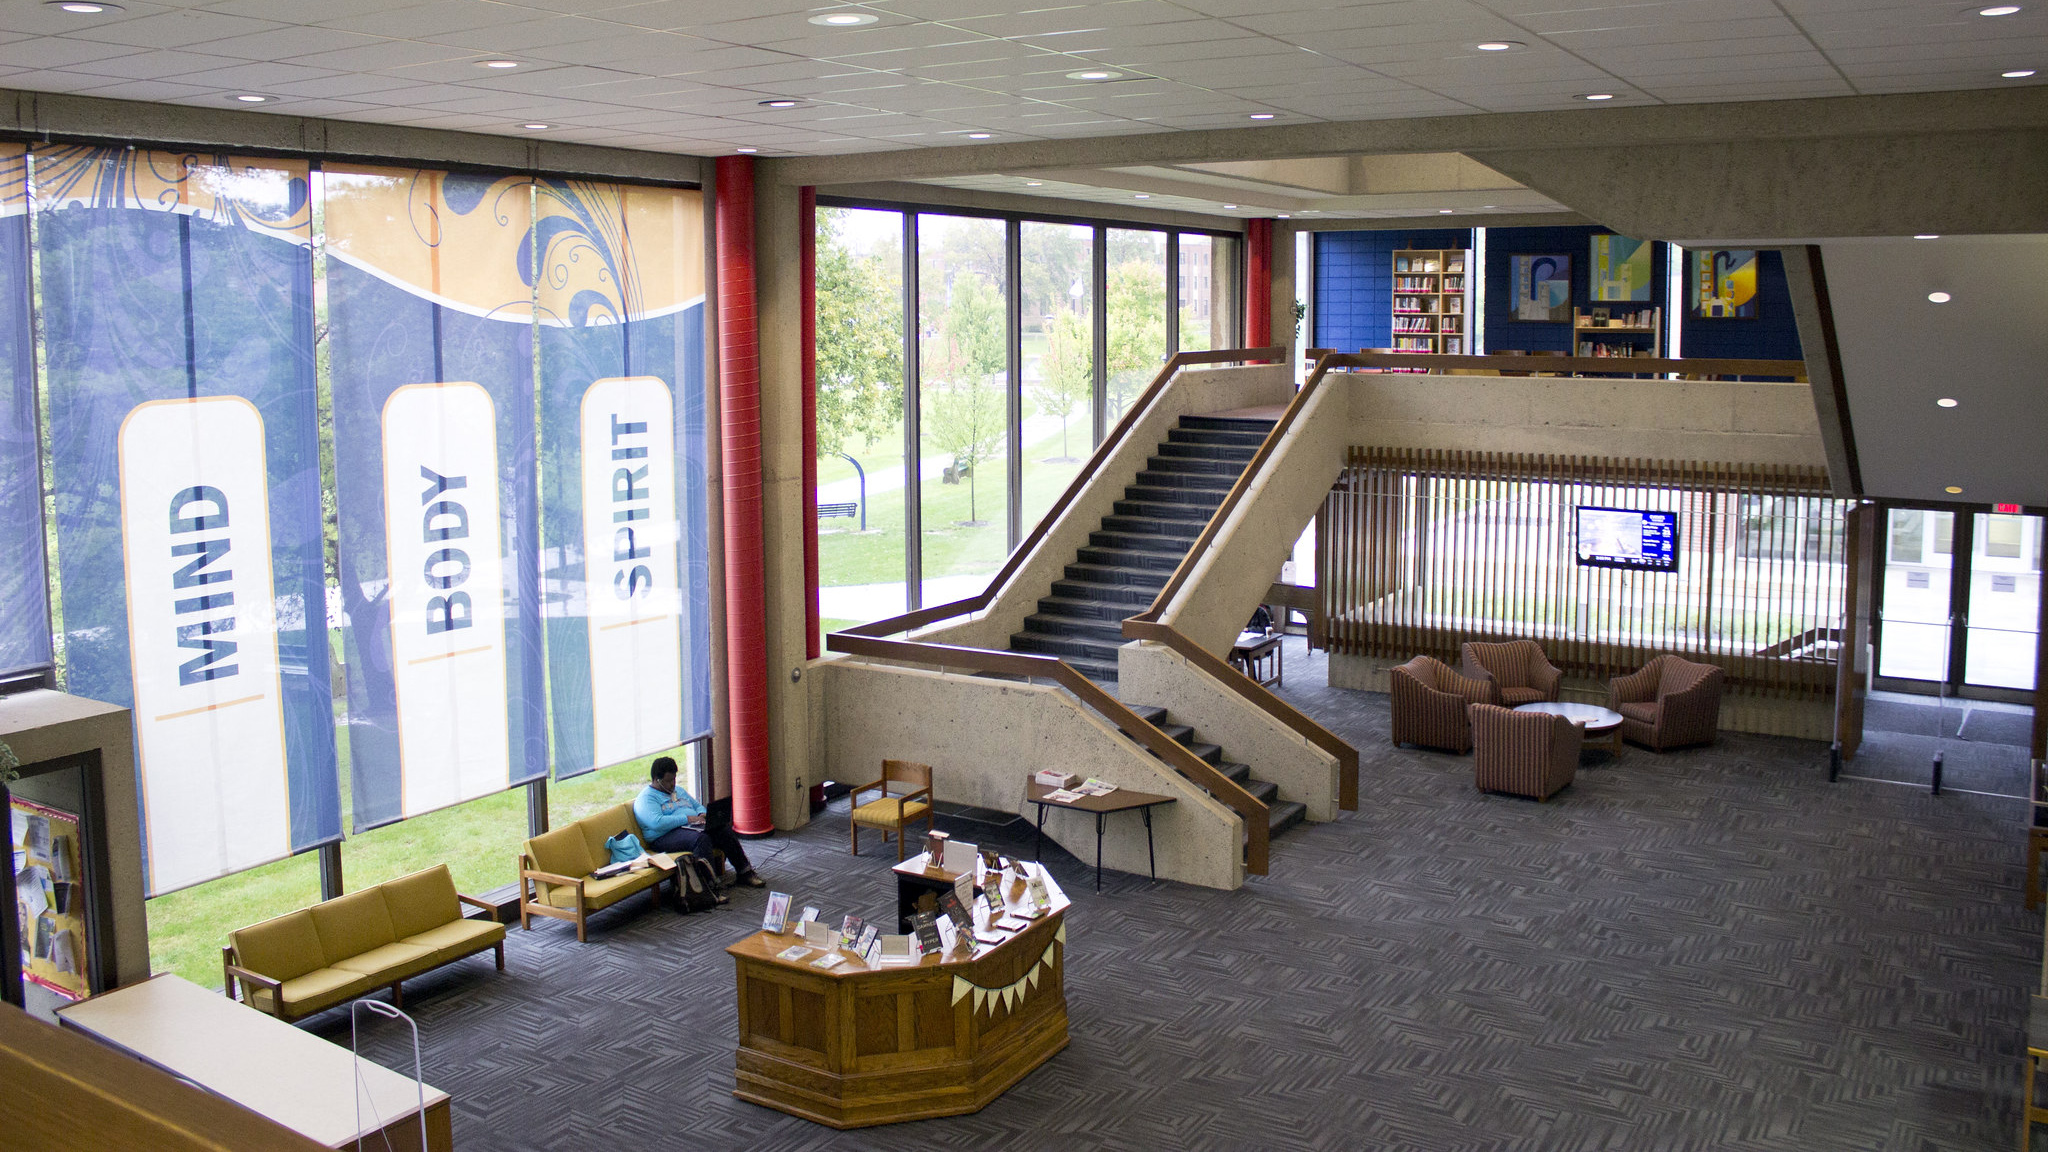 Inside Marian University Library with staircase and help desk in front of floor-to-ceiling windows